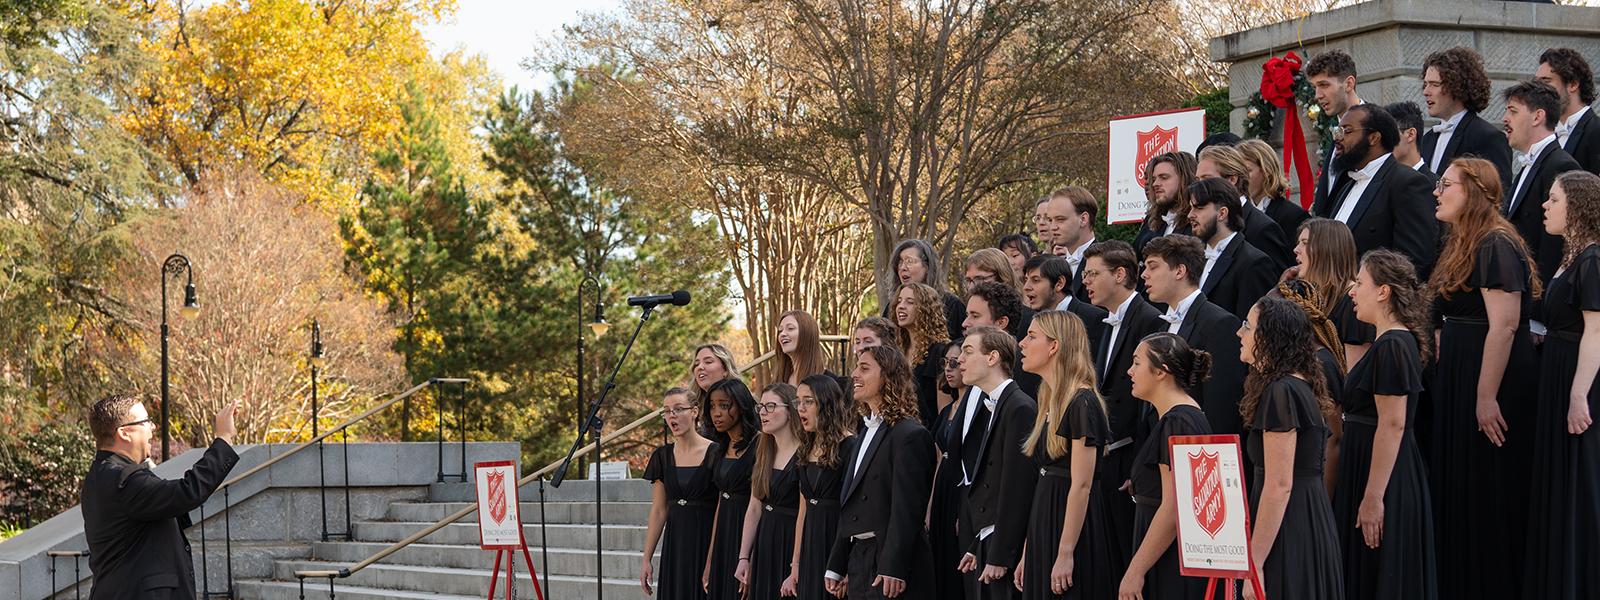 The CIU Ambassador Choir on the steps of the South Carolina Statehouse directed by Bryce Thompson. (Photo by Noah Allard) 